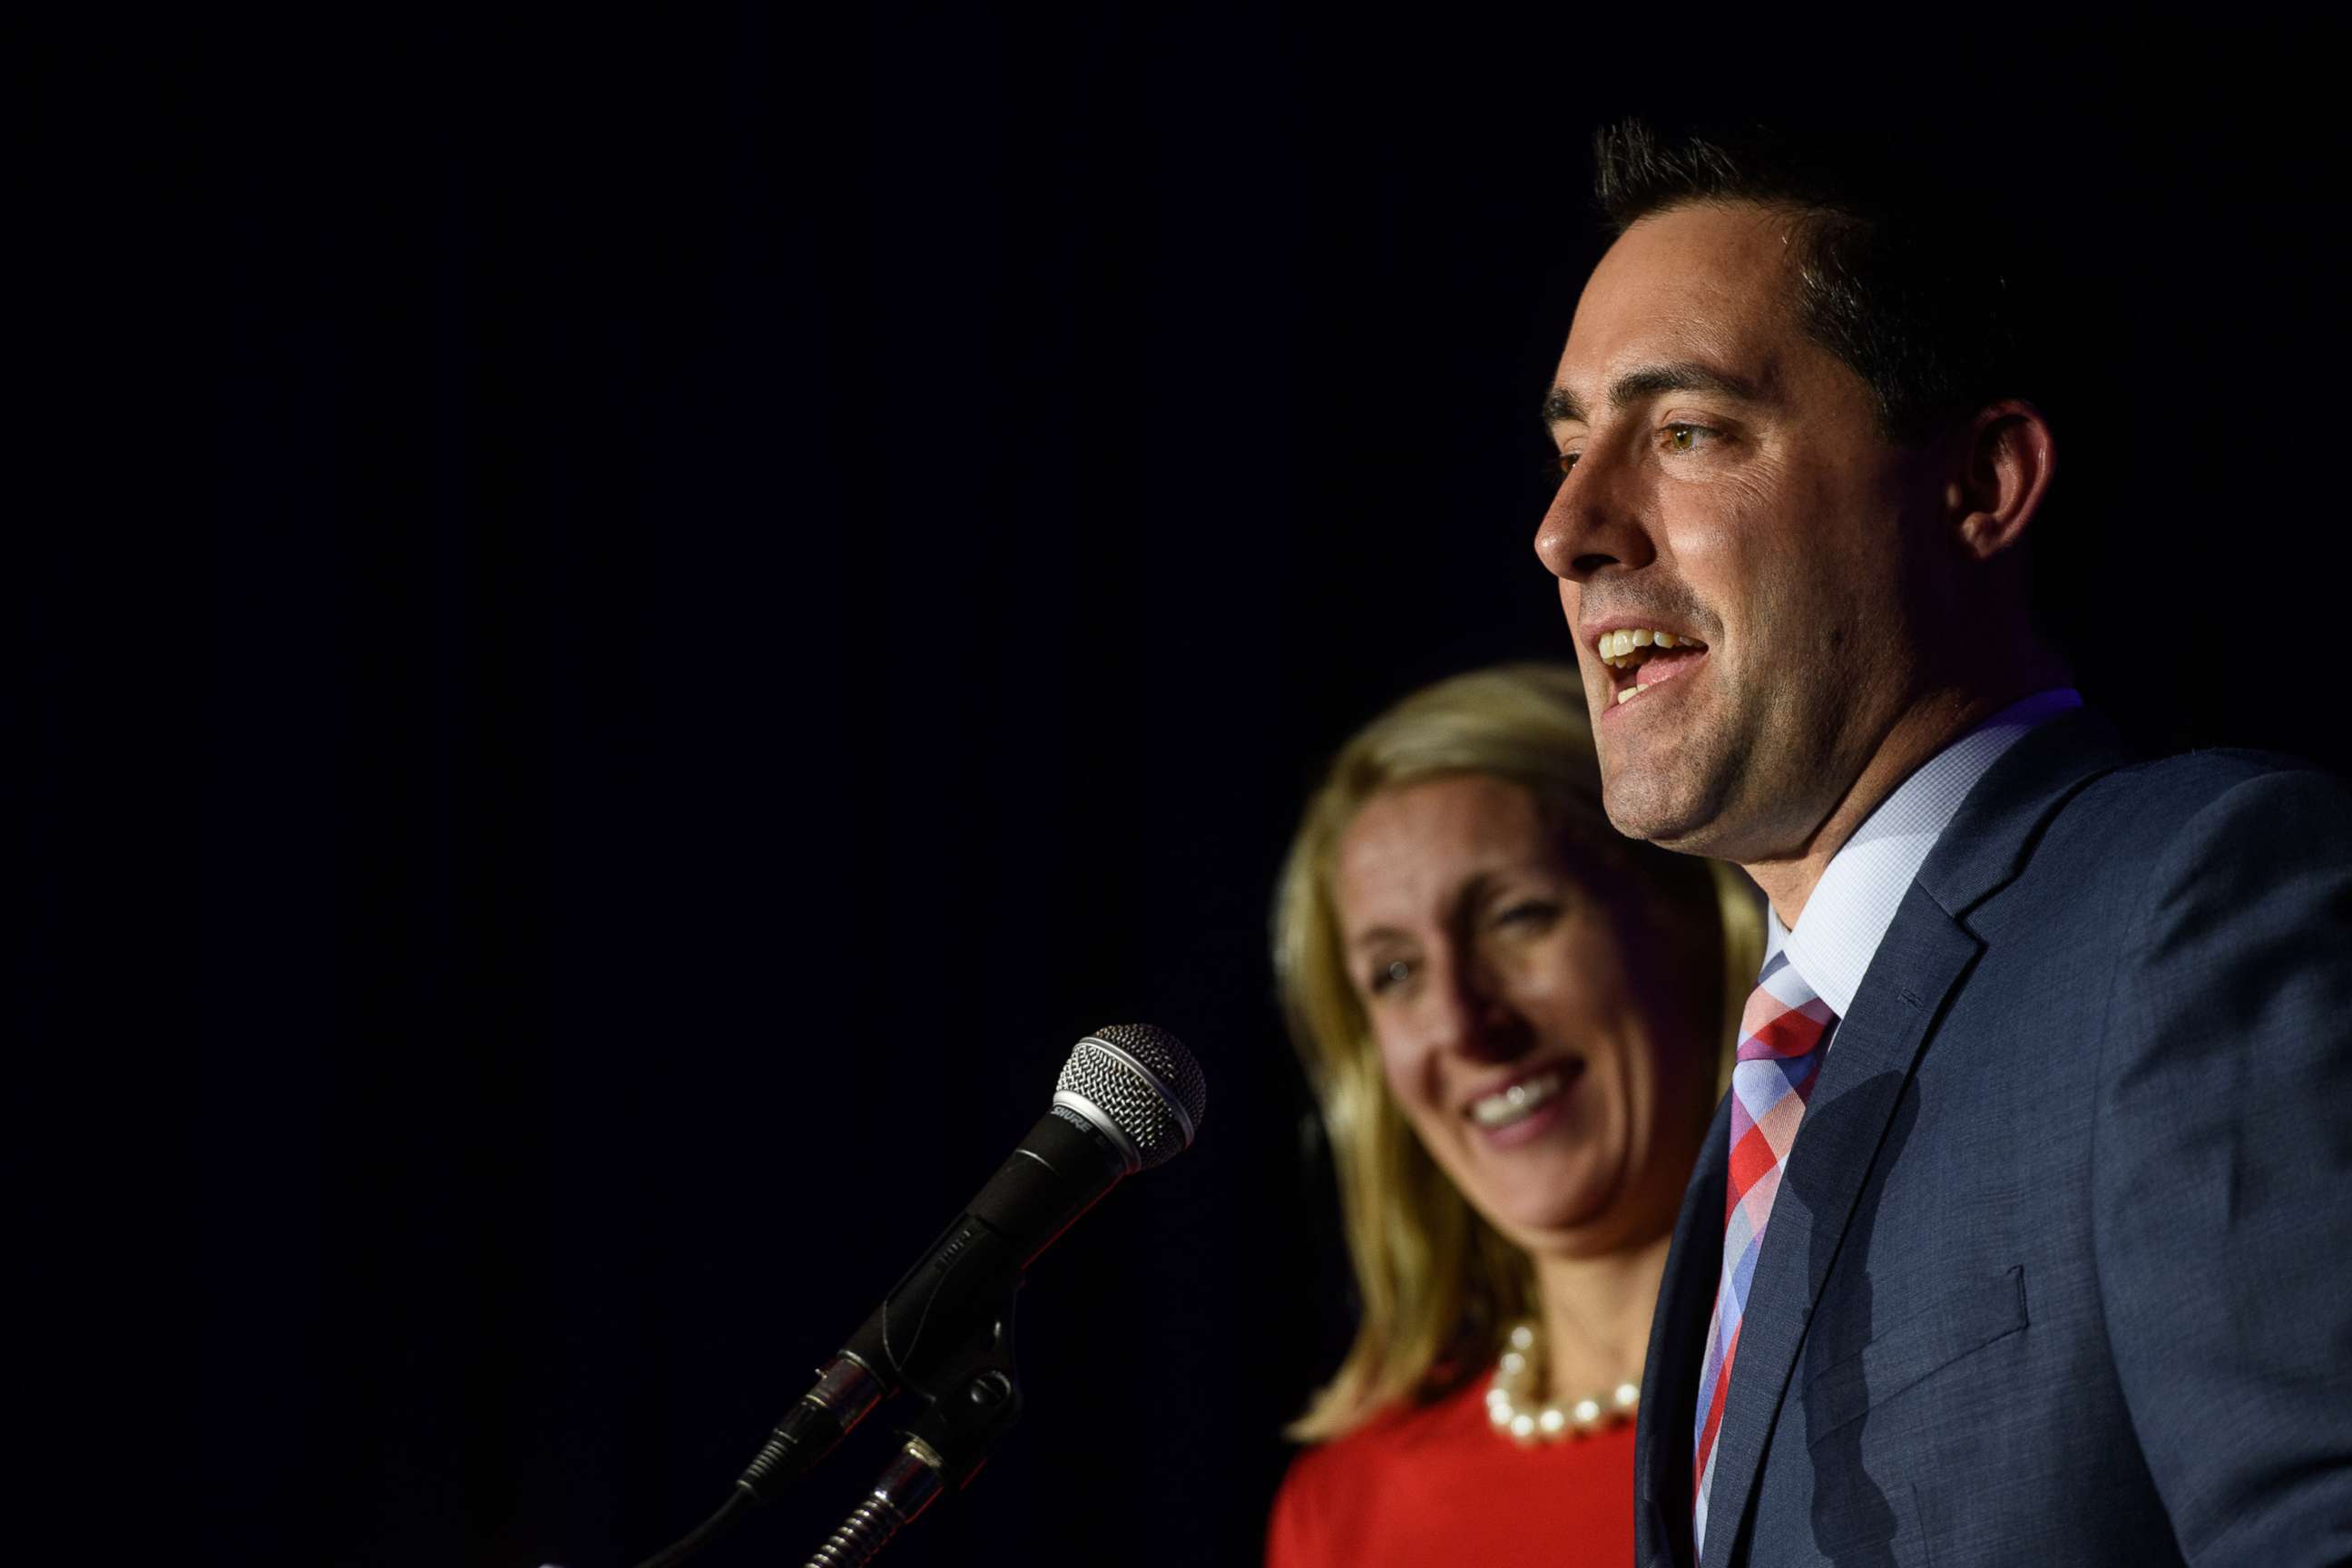 PHOTO: Frank LaRose gives his victory speech after winning the election for Ohio Secretary of State on Nov. 6, 2018, in Columbus, Ohio.